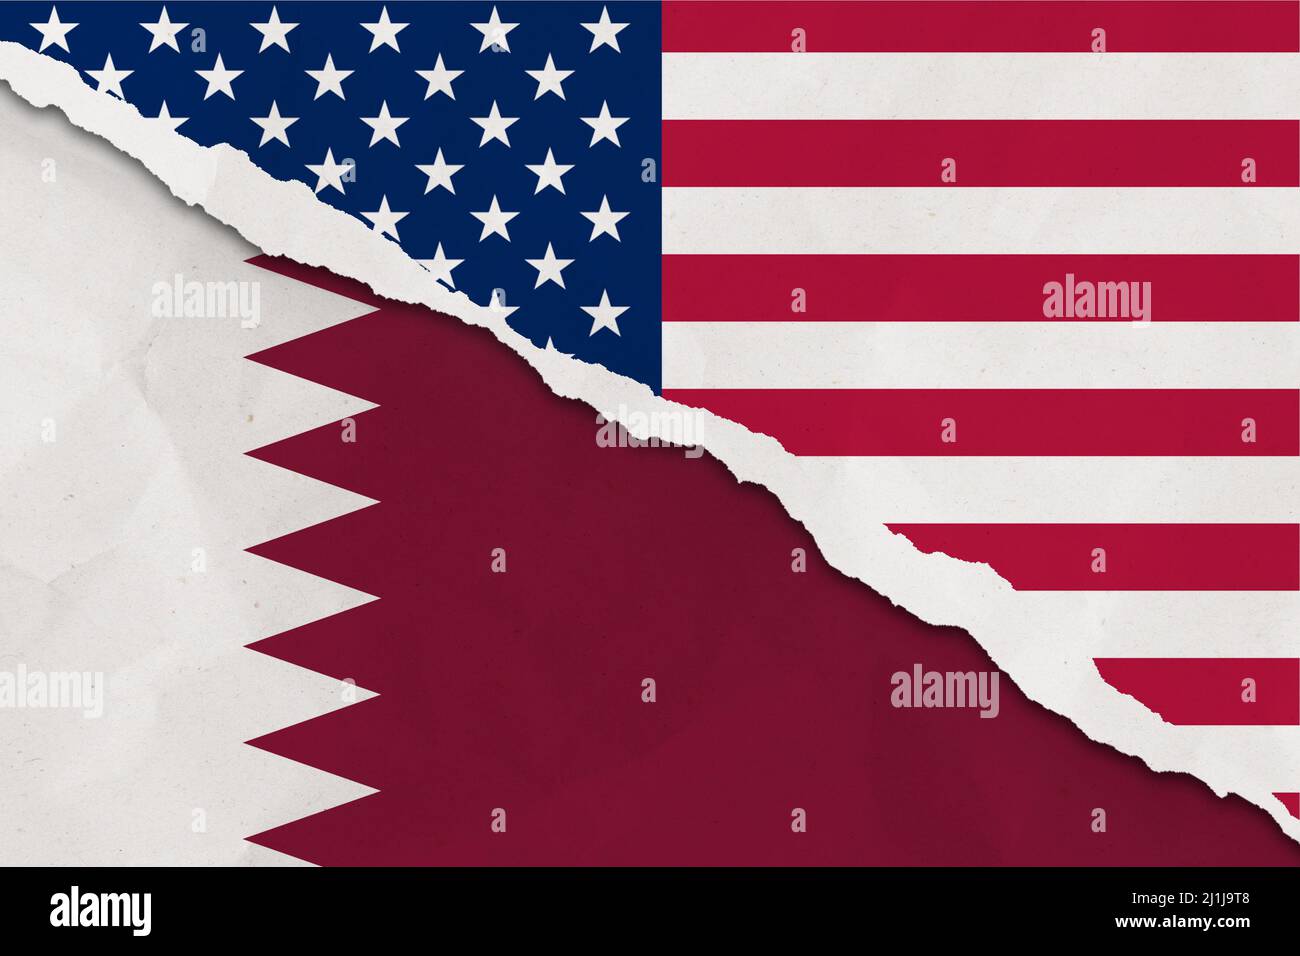 United States and Qatar flag ripped paper grunge background. Abstract United States and Qatar economics, politics conflicts, war concept Stock Photo